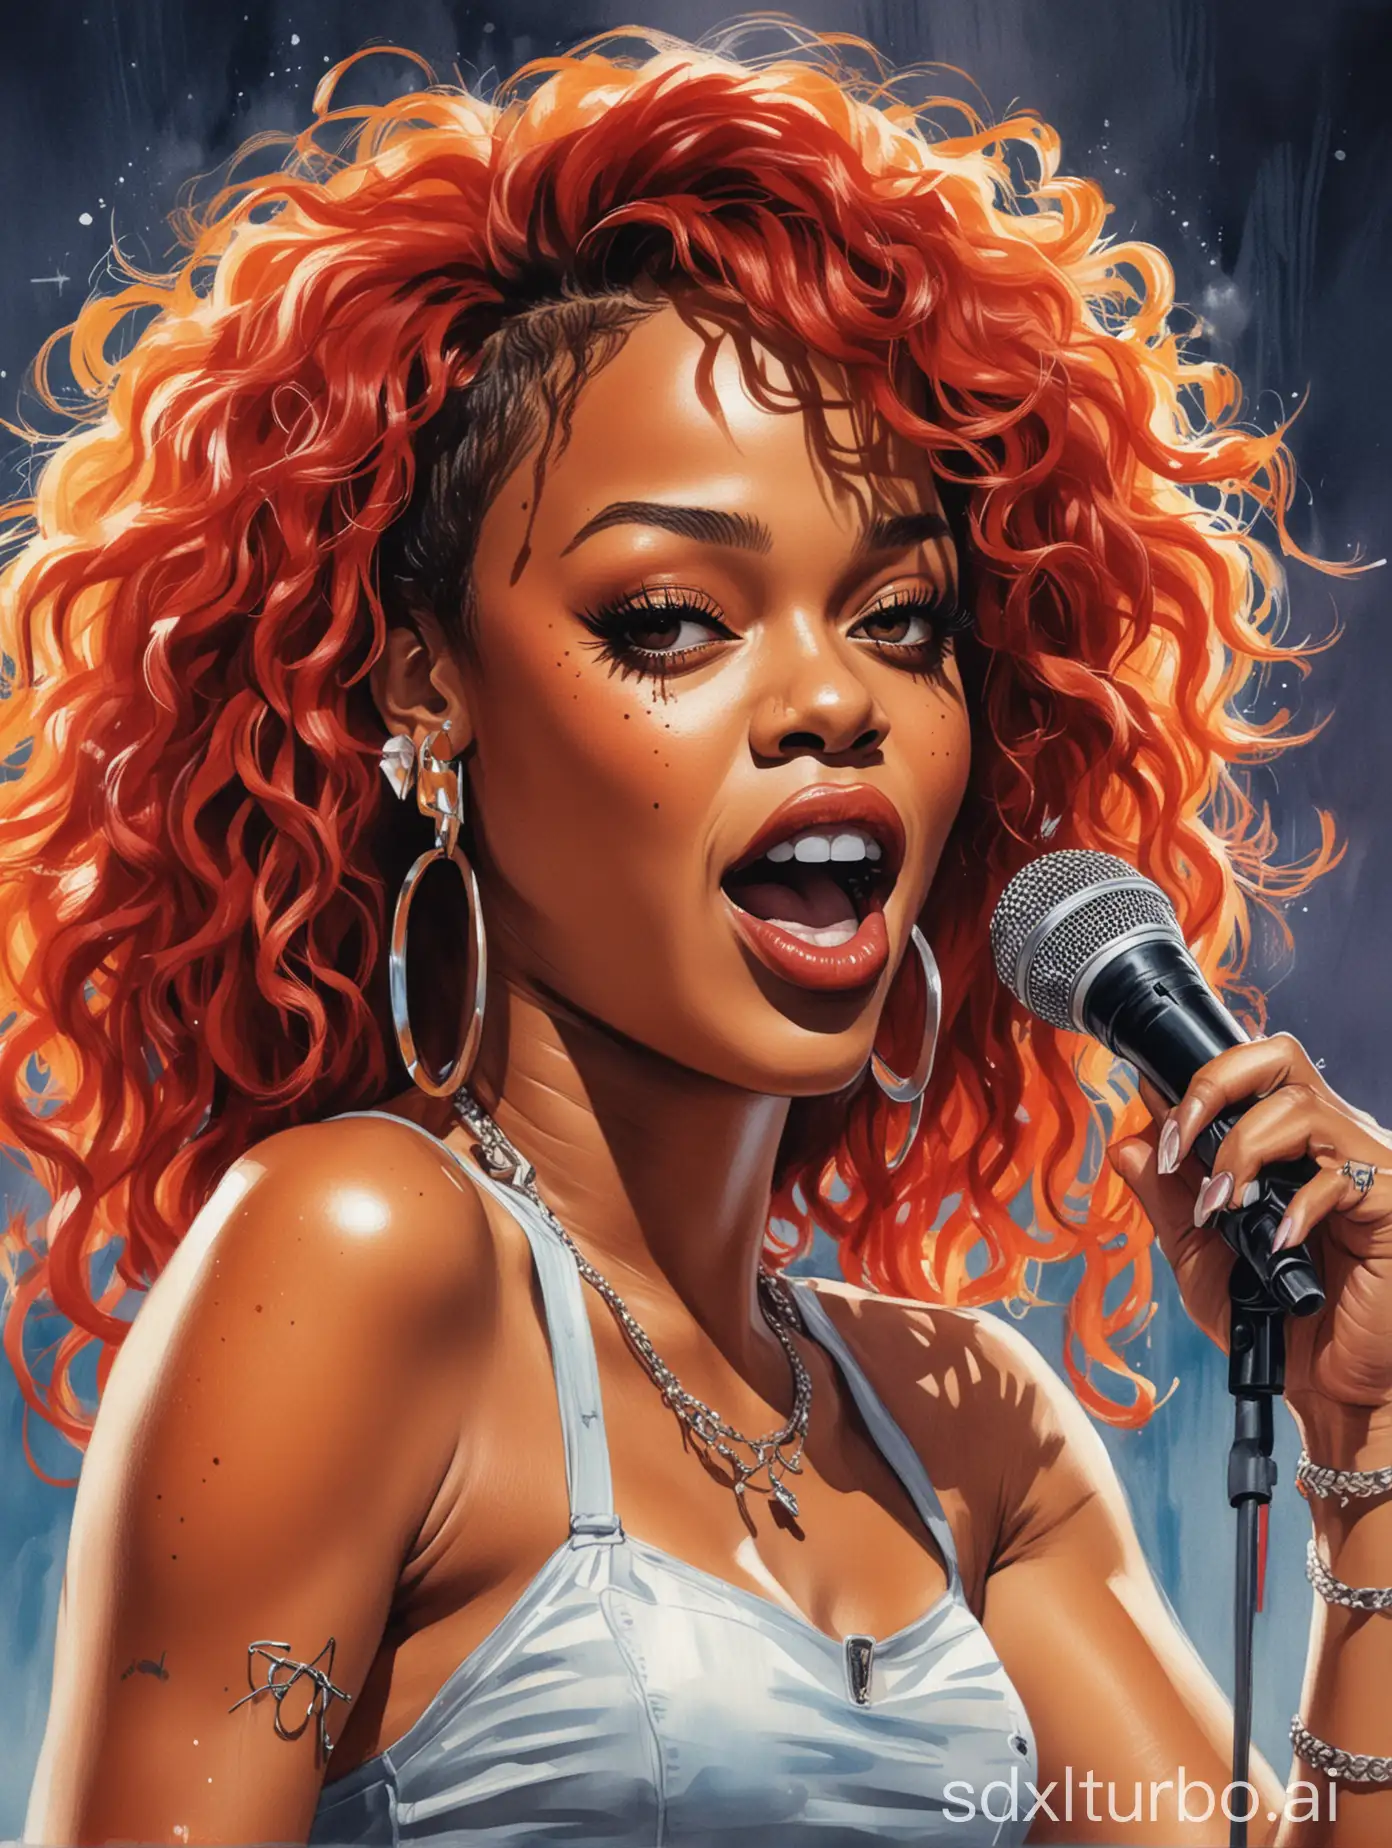 Rihannas-Energetic-Performance-on-a-Whimsical-Stage